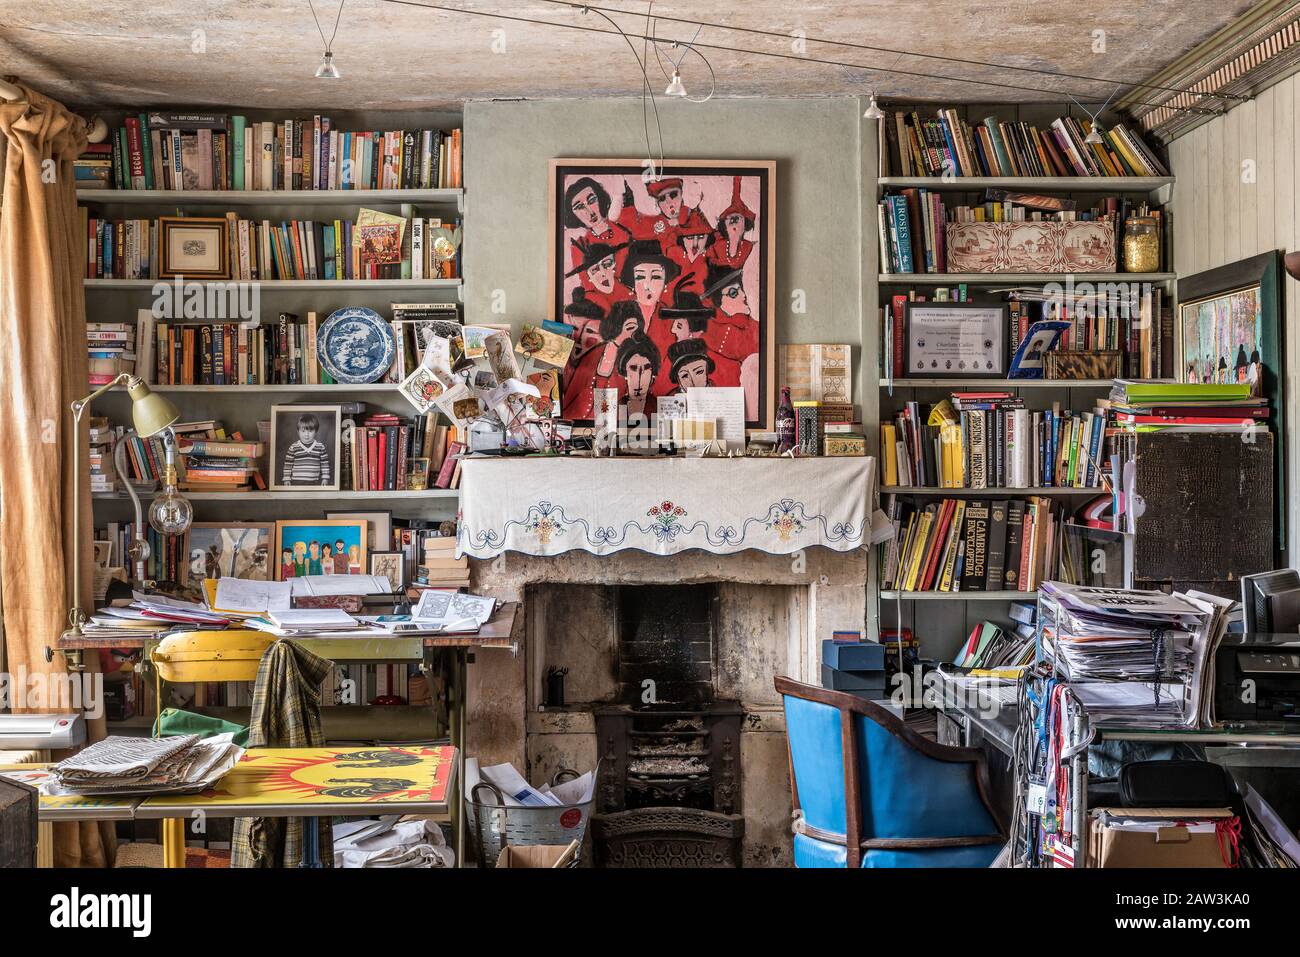 Cluttered room with bookcases and fireplace Stock Photo